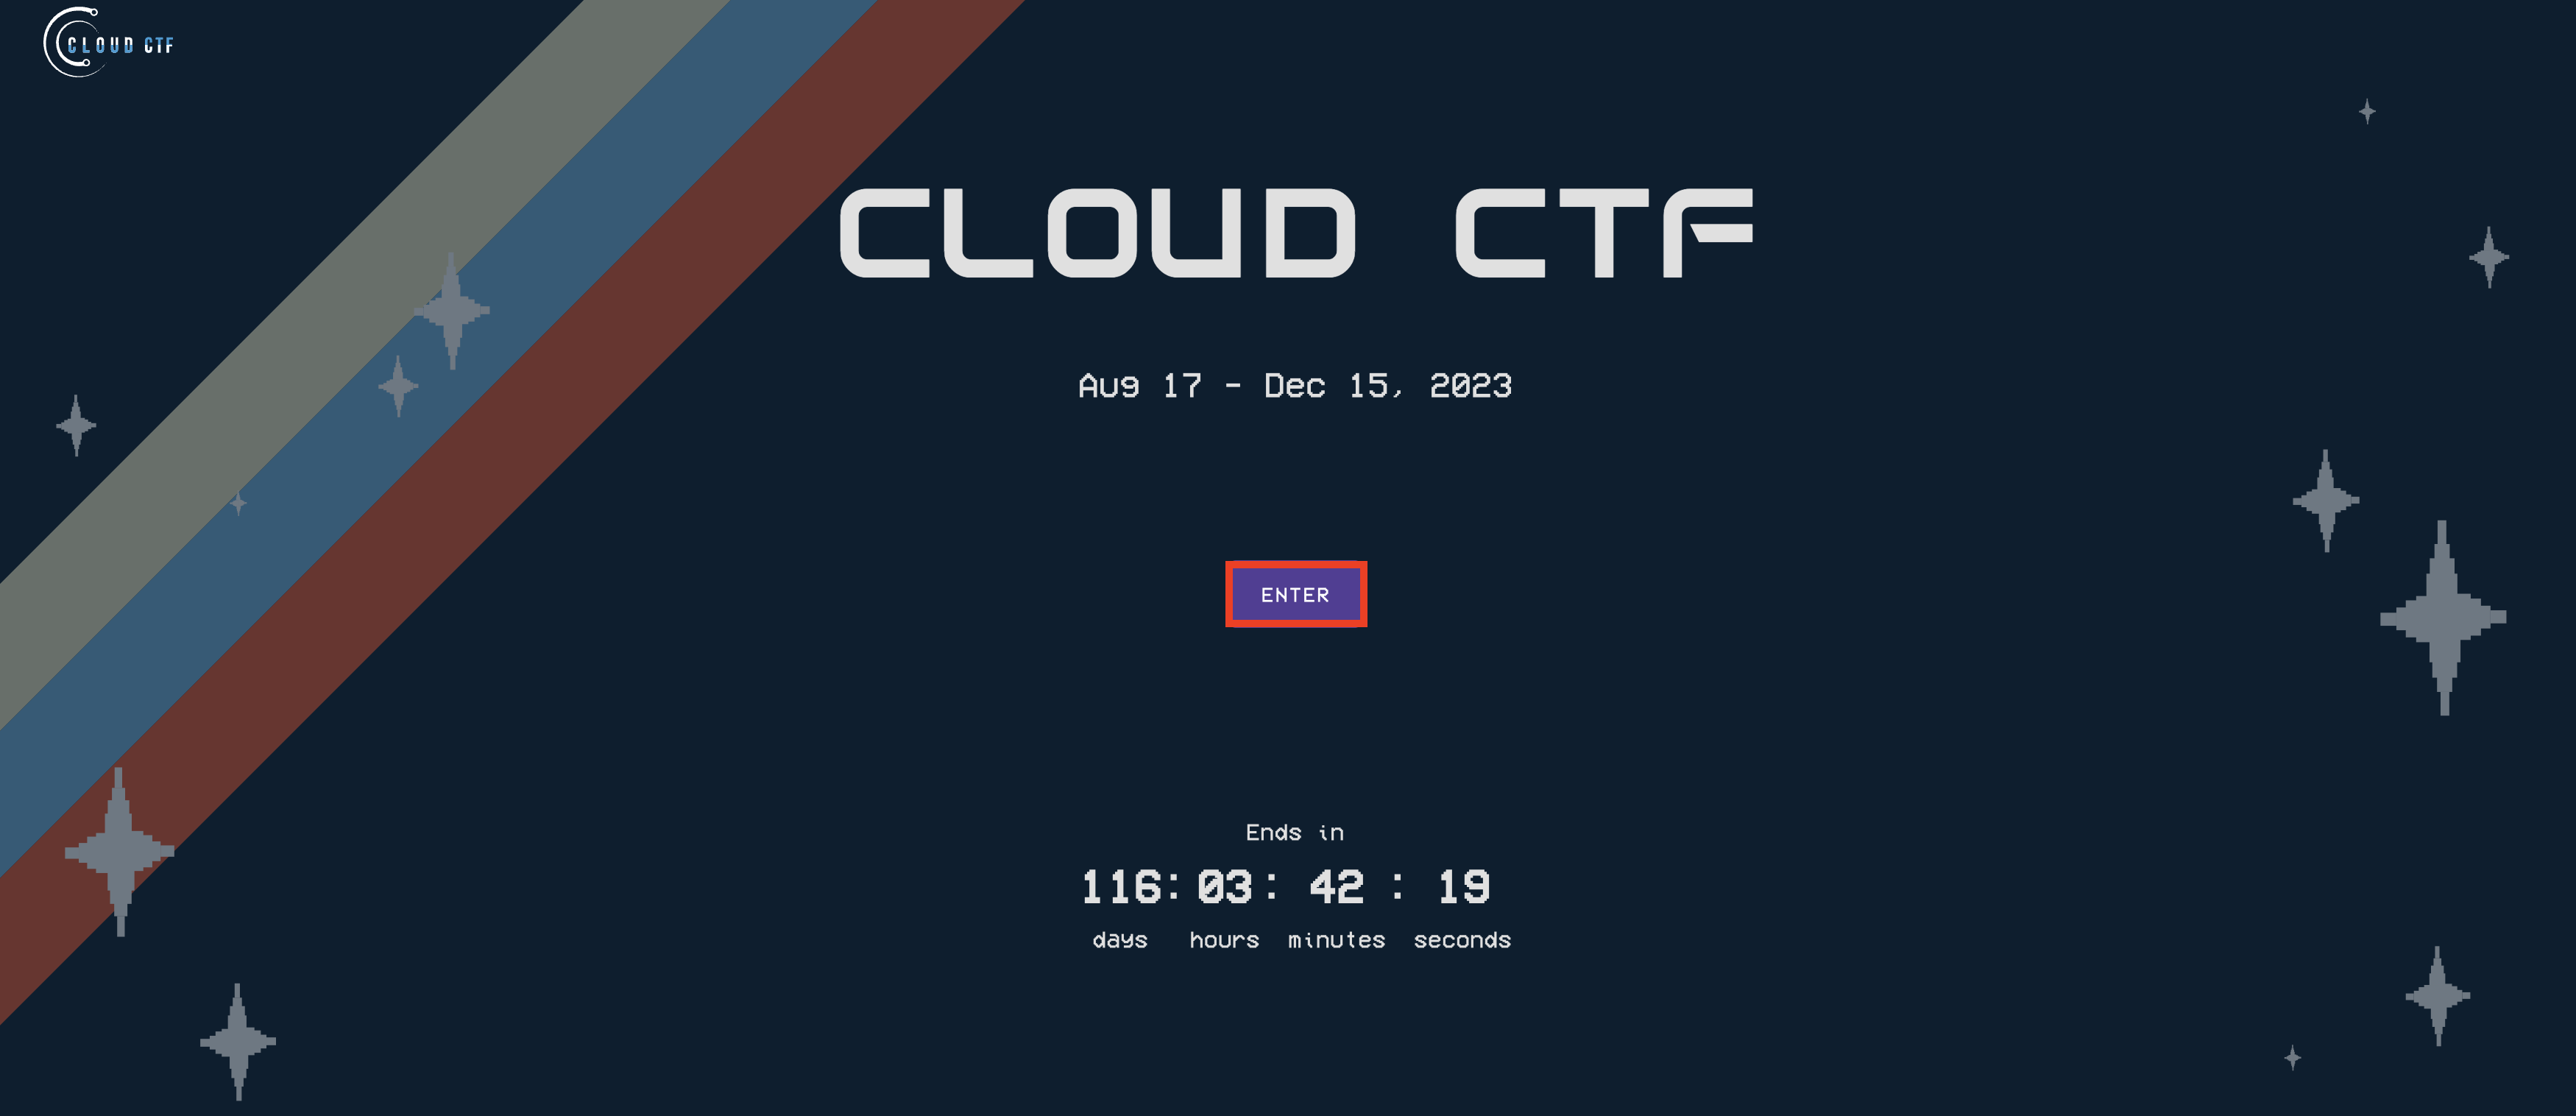 An example of the Cloud CTF start screen is shown. The "enter" button is located in the middle of the screen under the CTF's availability dates.